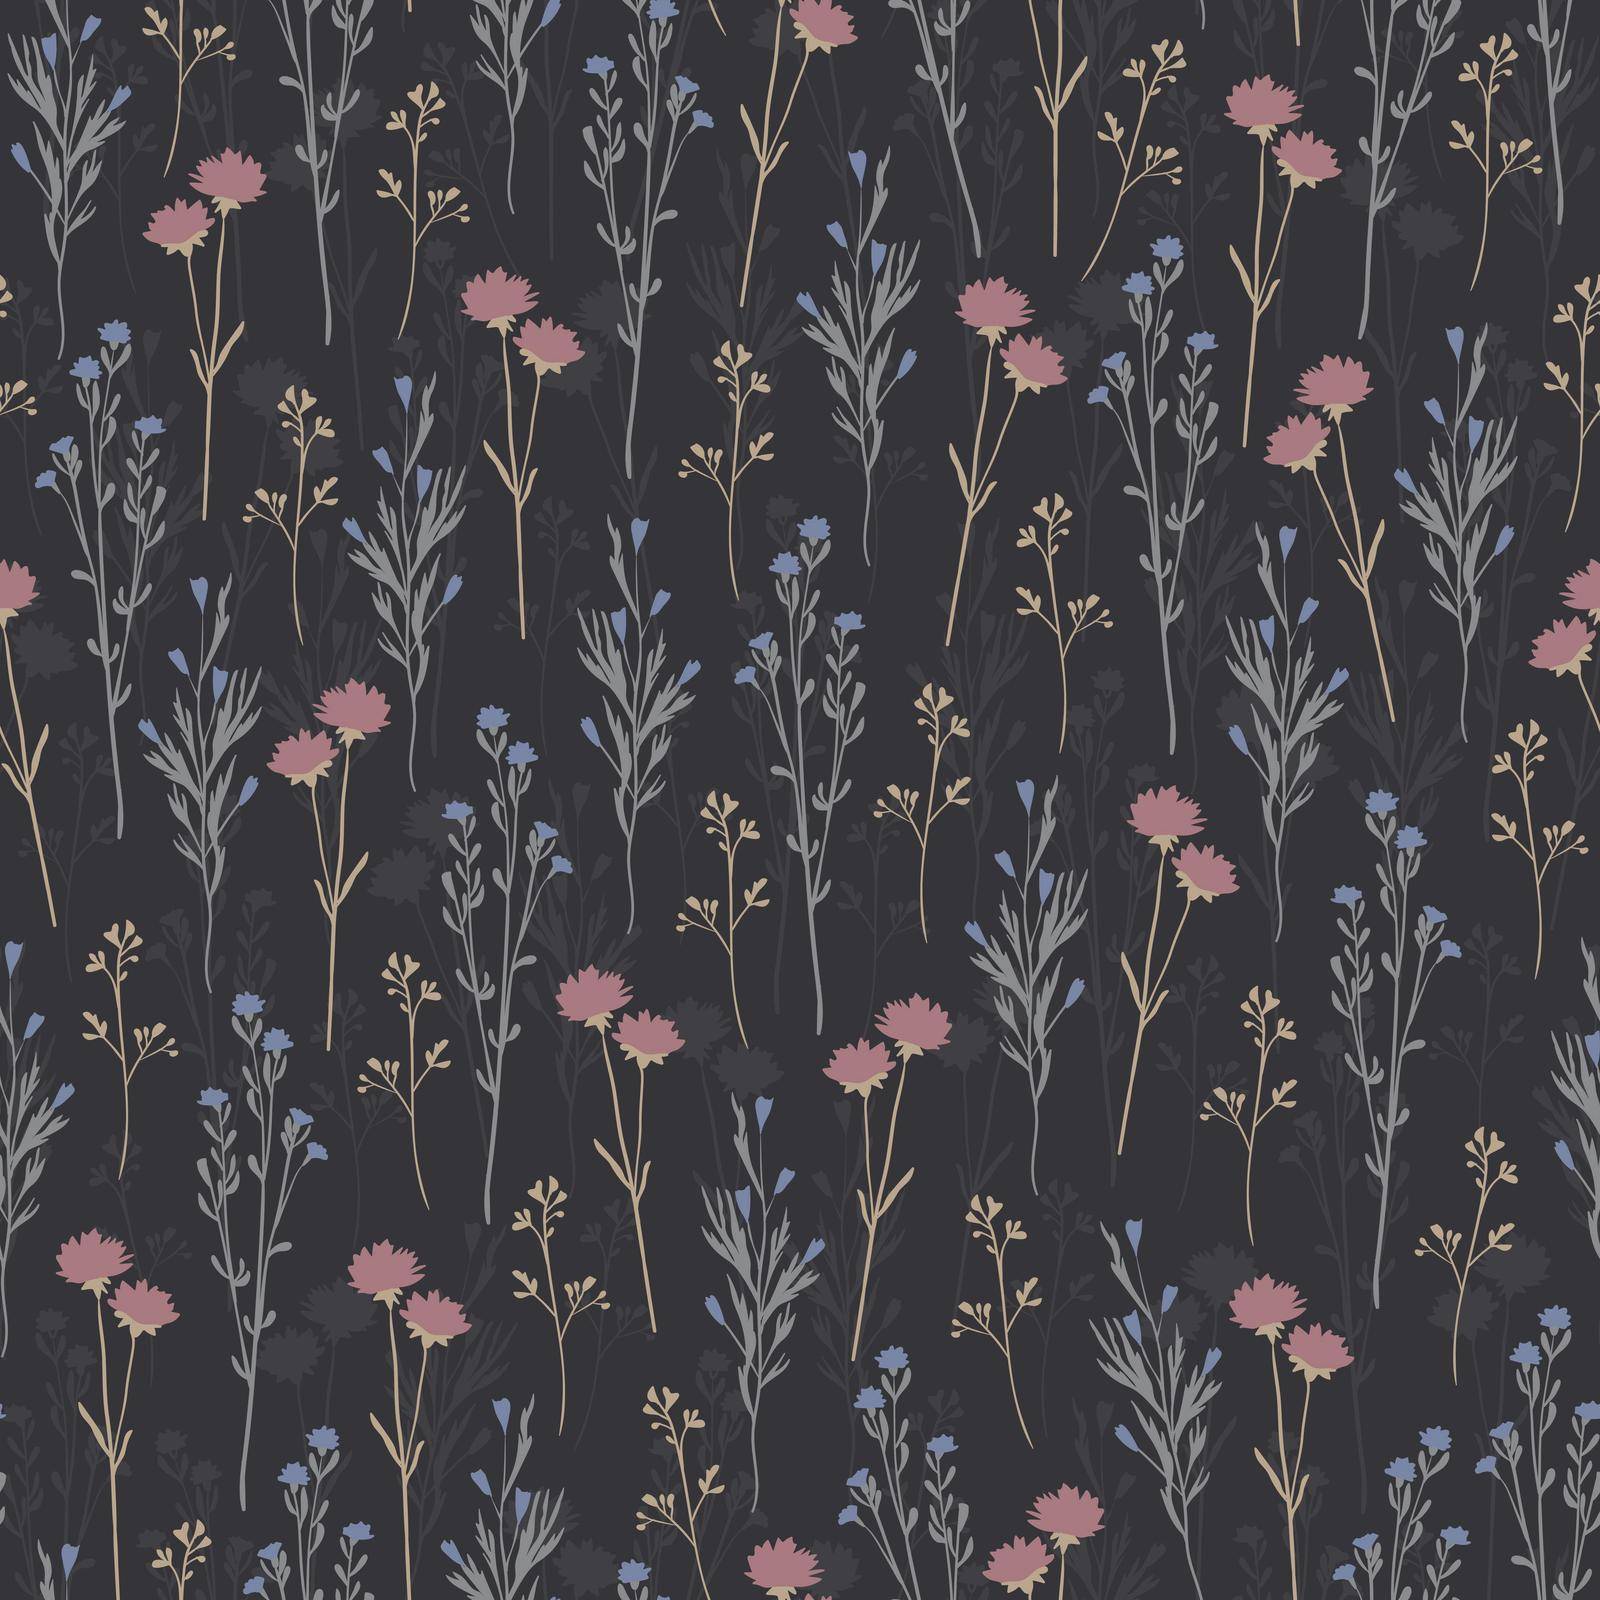 Seamless repeating pattern of flowers by IlyaYorkow